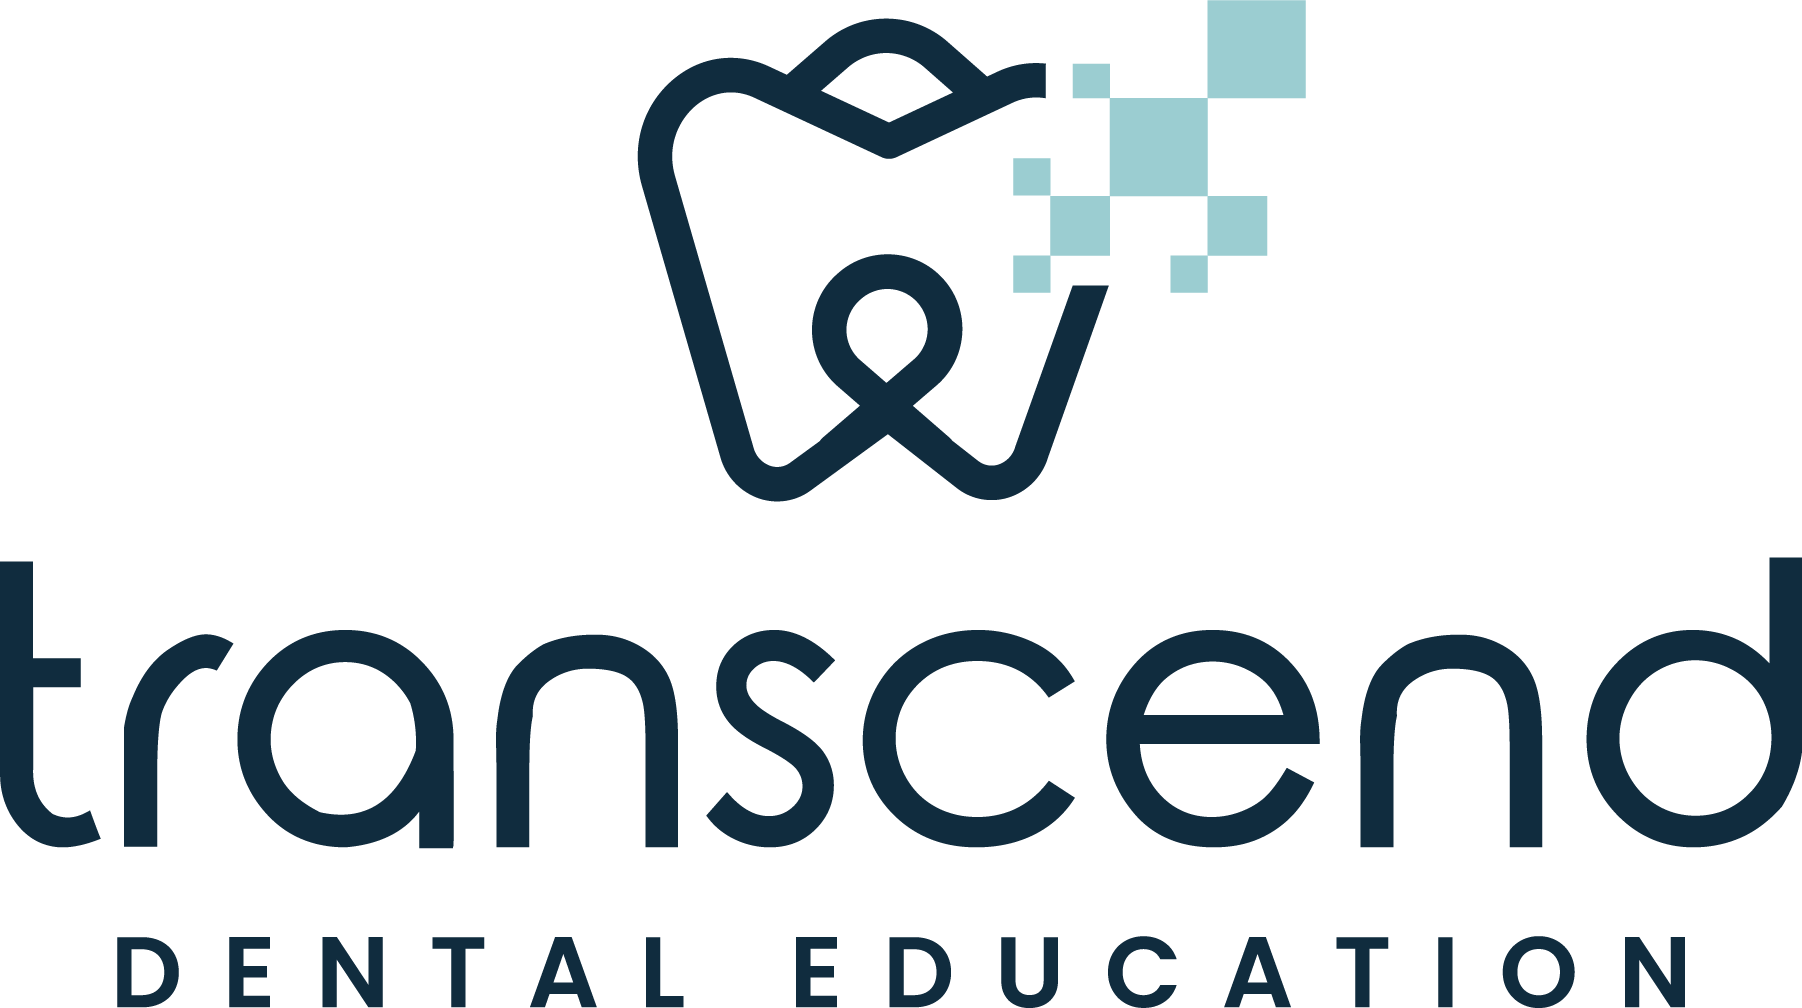 Transcend Dental Education Center Opens to Provide Care to Underserved Communities